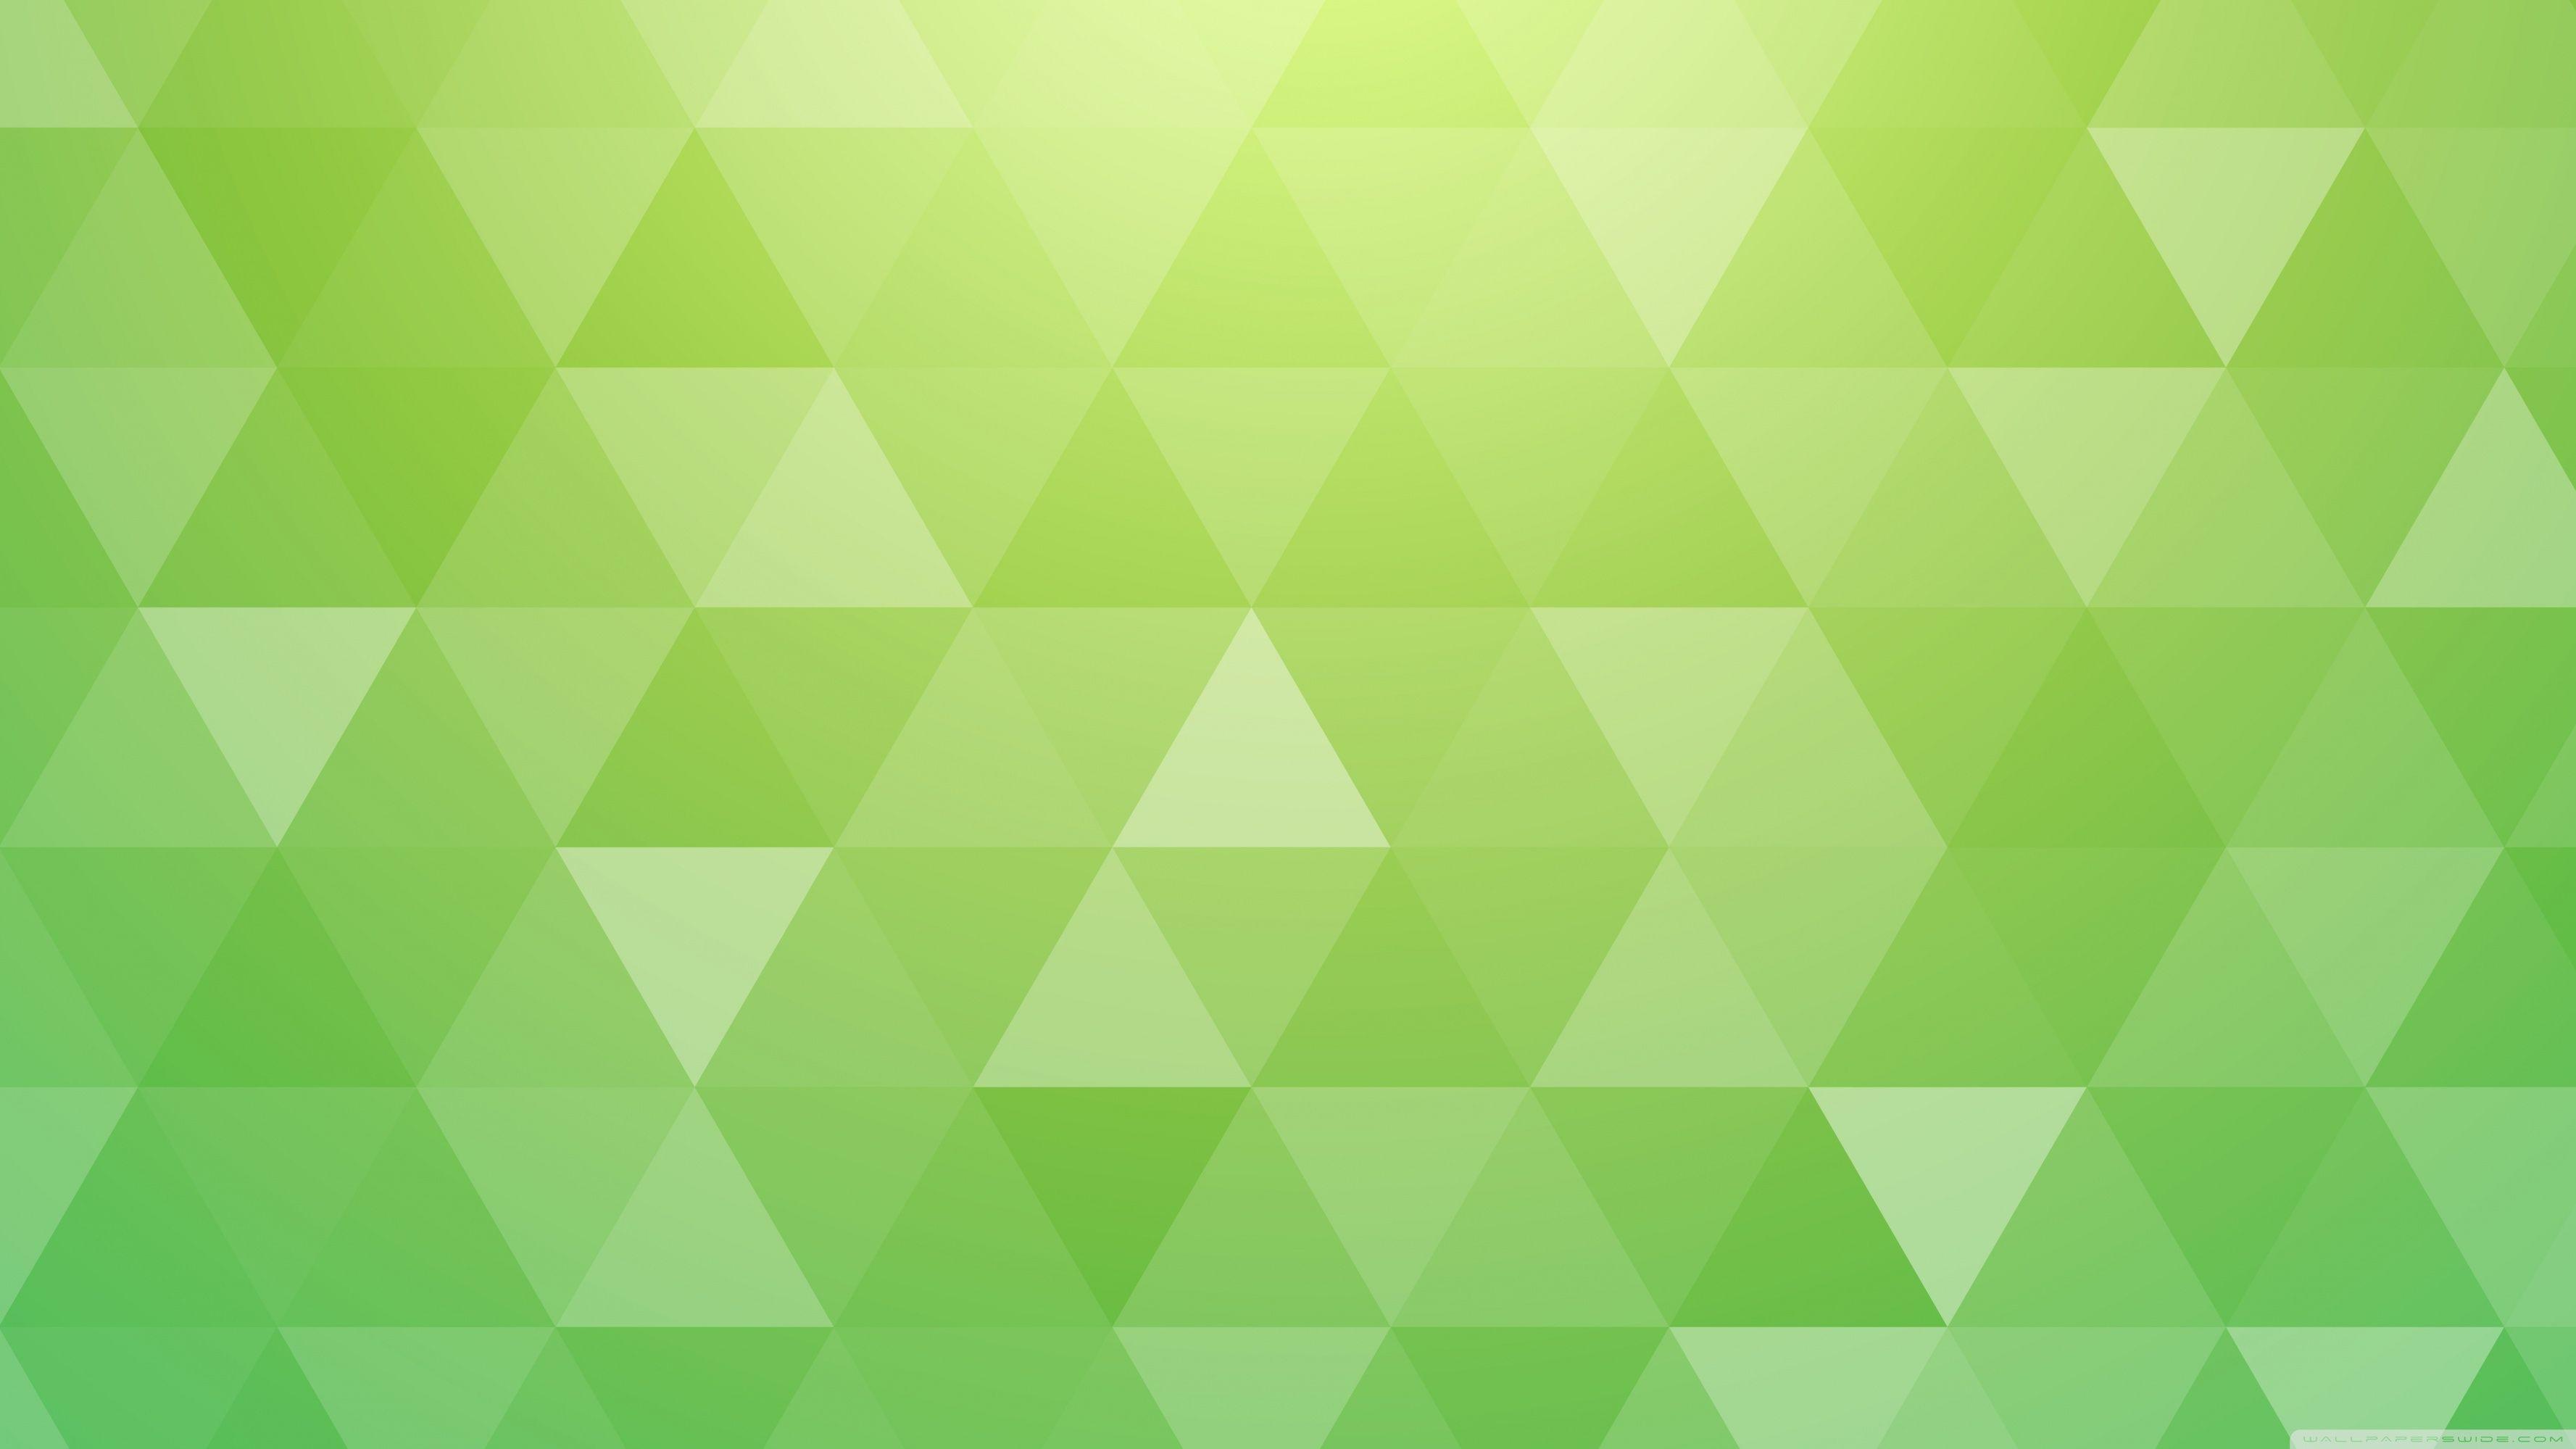 Light Green Abstract Wallpapers - Top Free Light Green Abstract